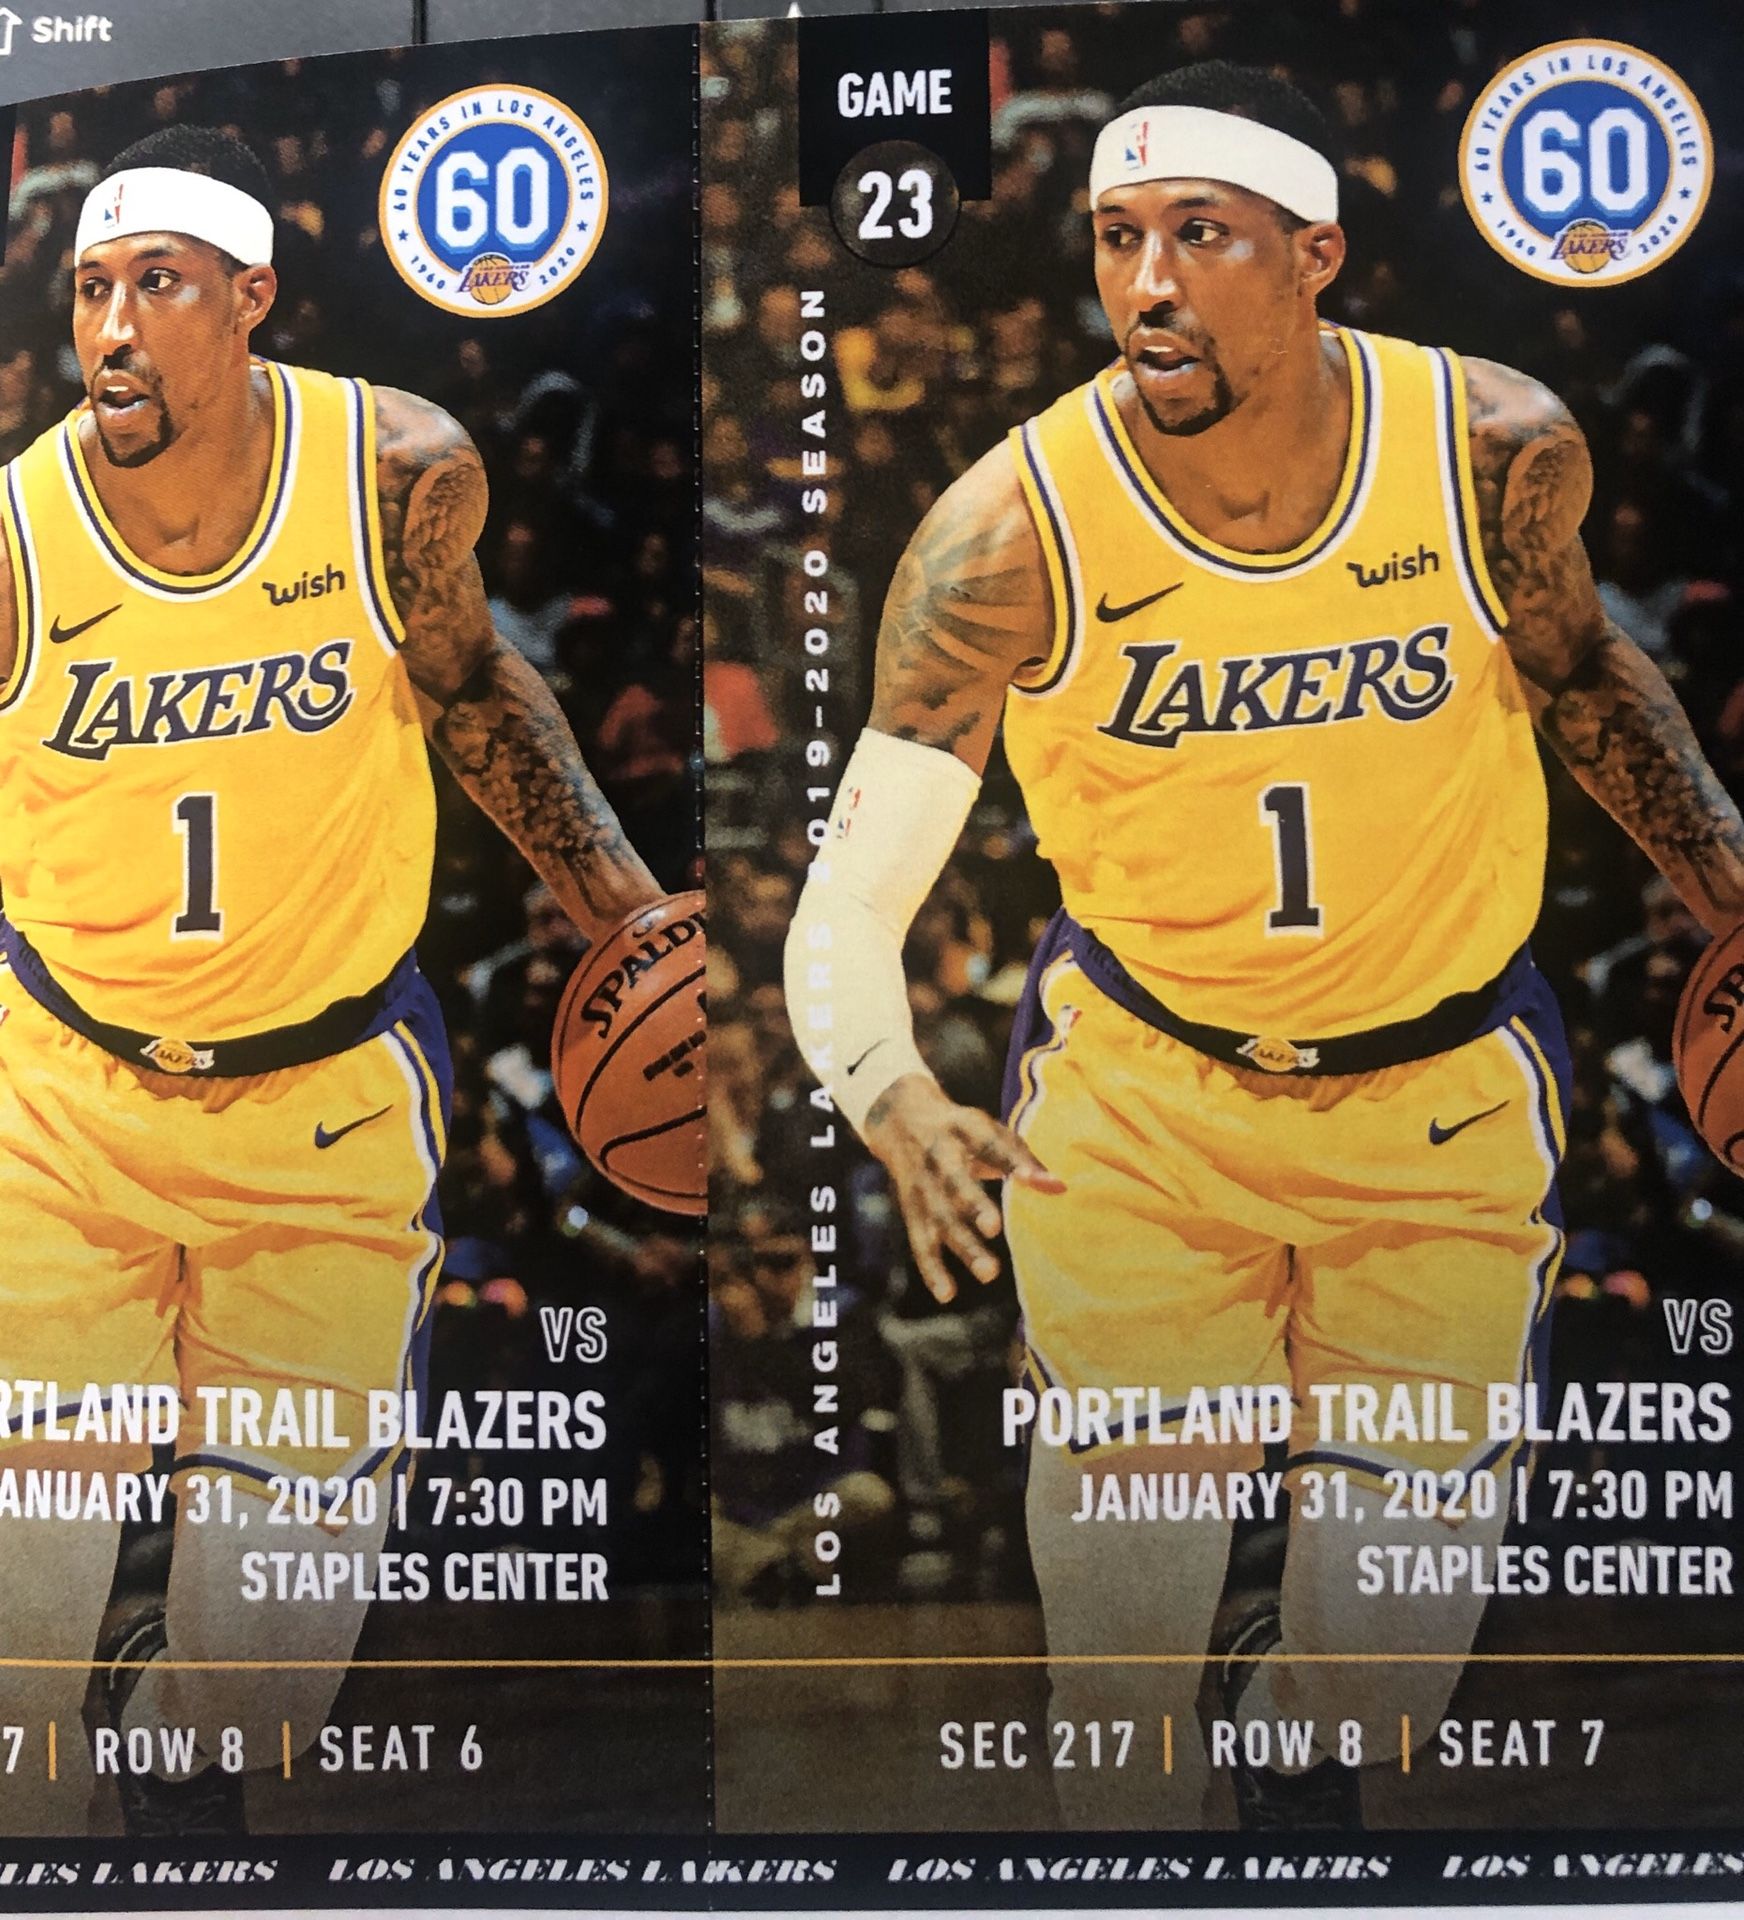 Lakers vs Portland 01-31-2020 2 tickets section 217 $400